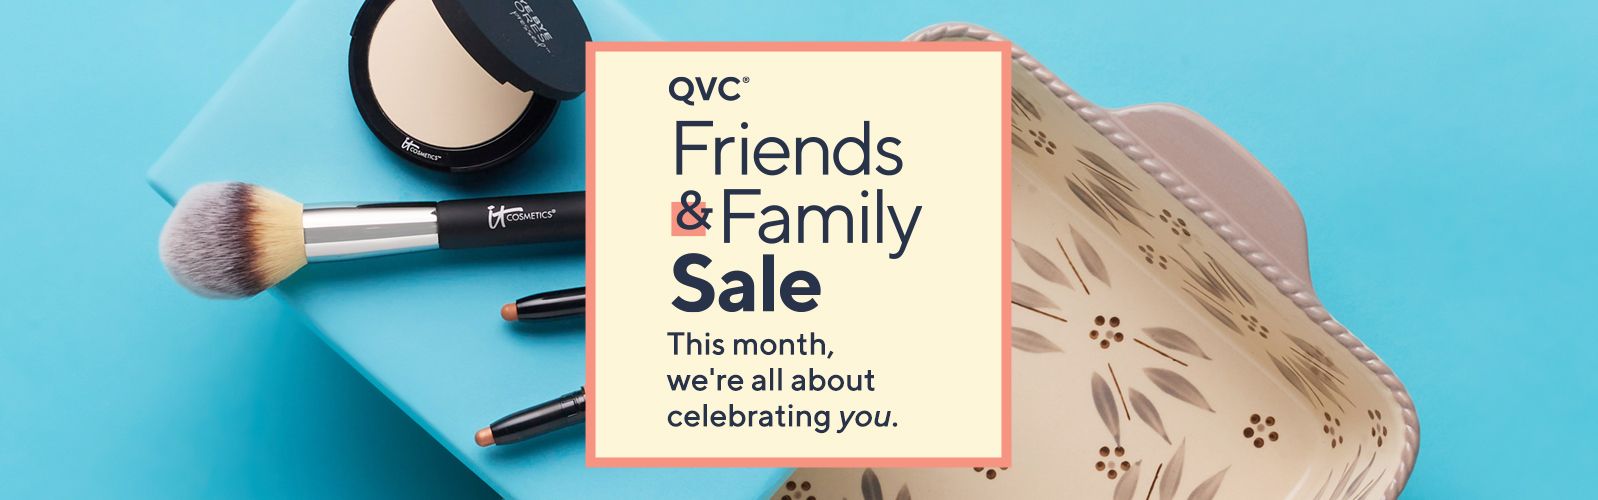 QVC | Shop QVC® For Today's Special Value & Top Brands At The ...